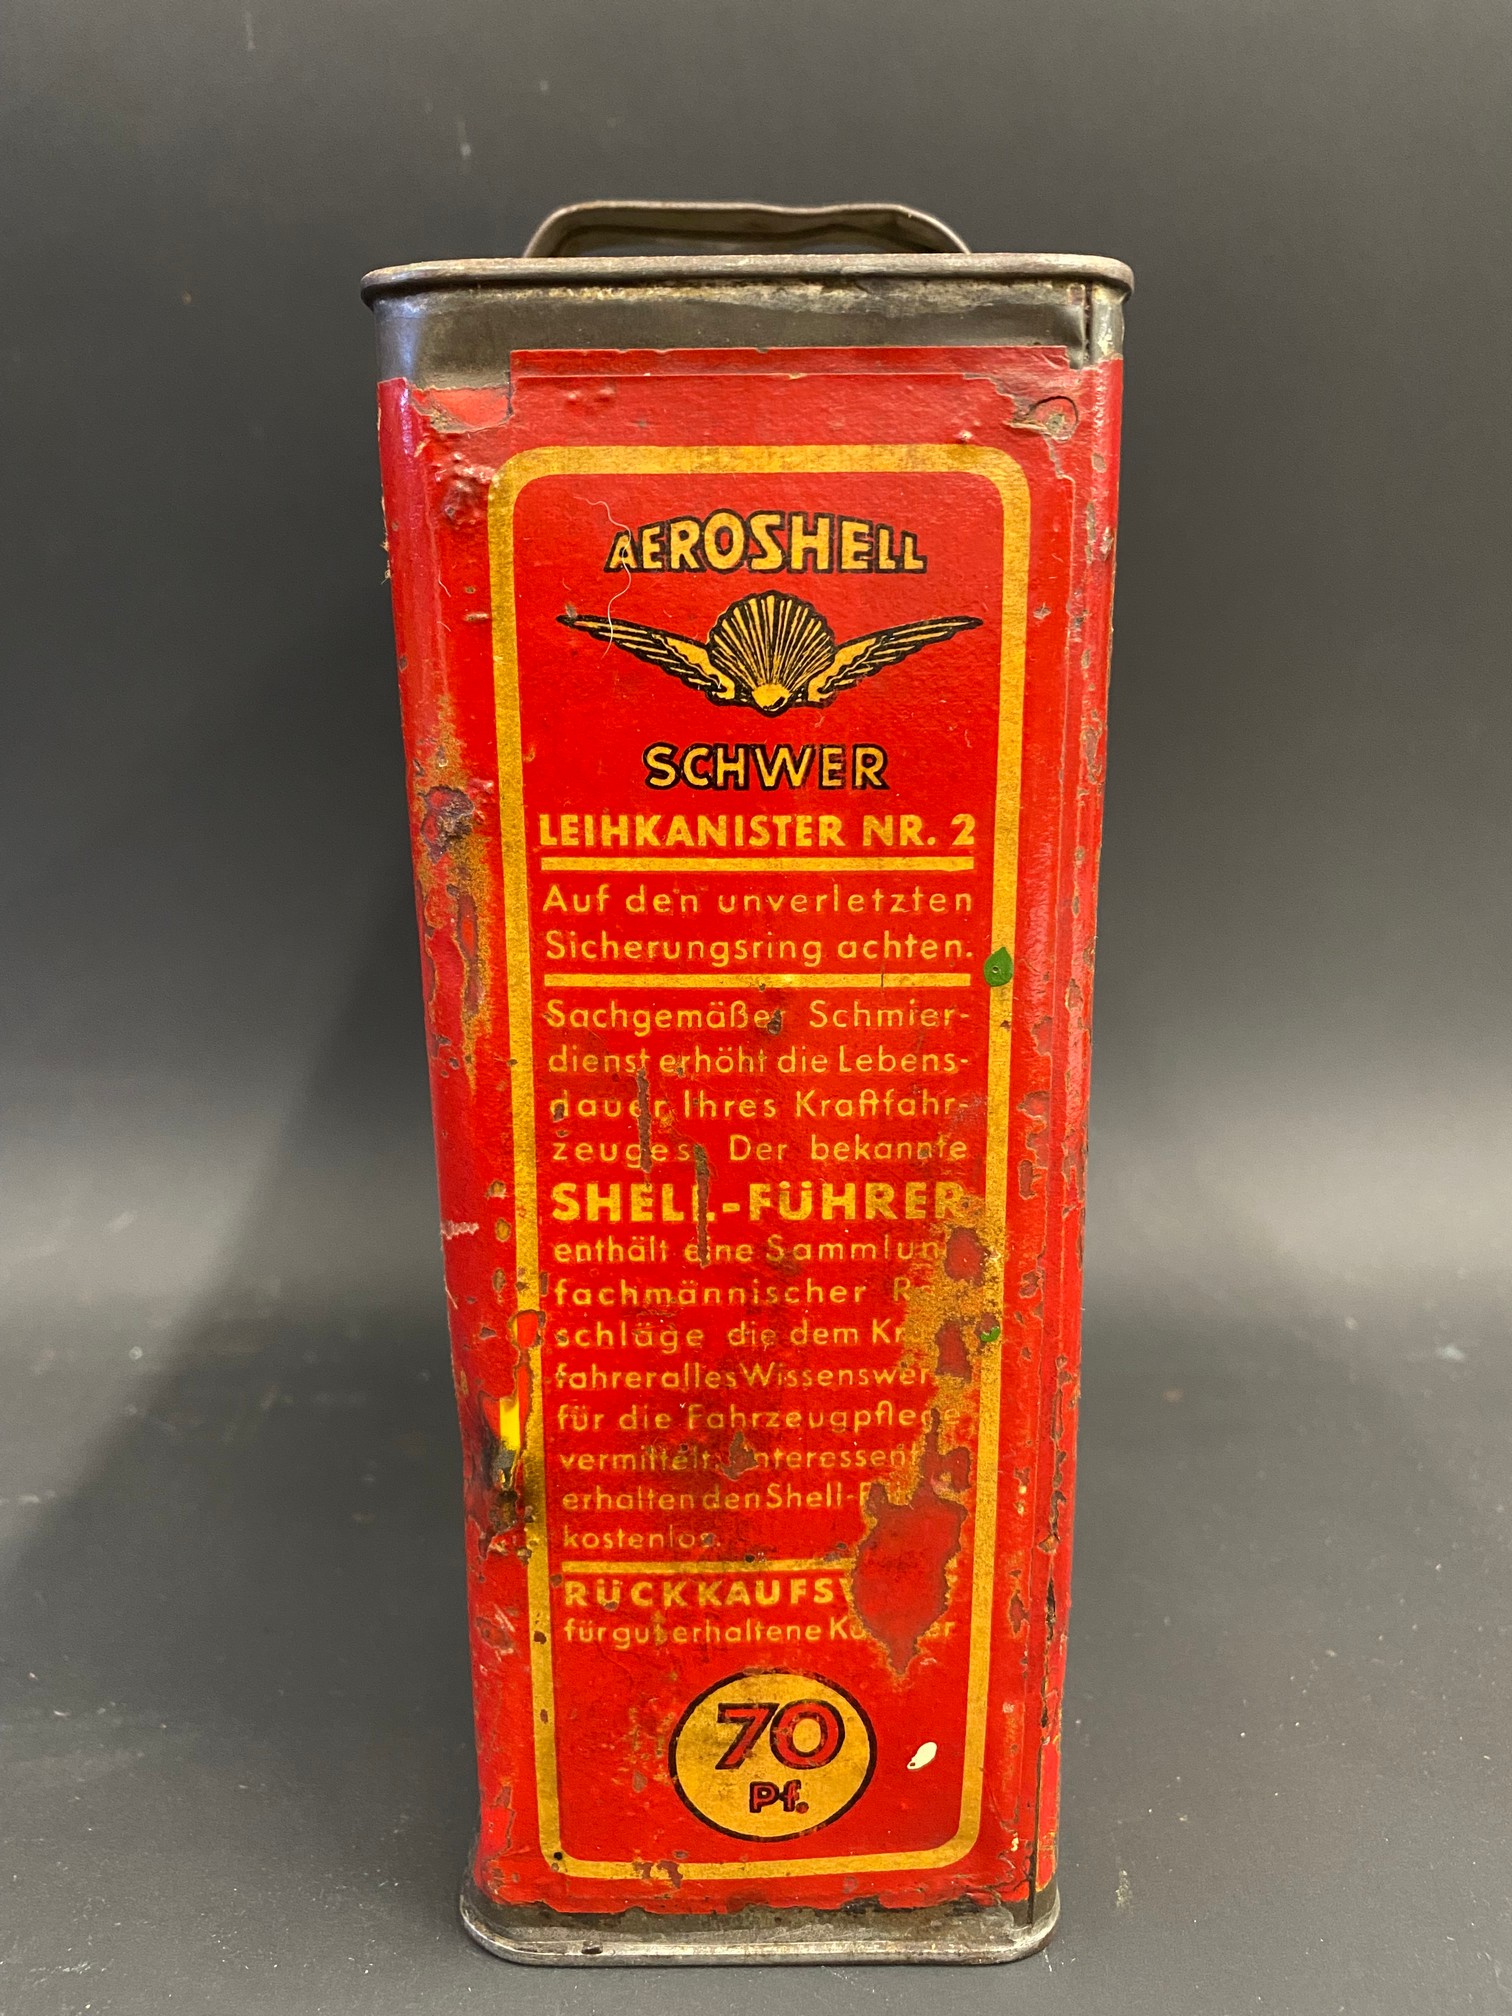 An early Aeroshell rectangular can, possibly half gallon, foreign version. - Image 4 of 6